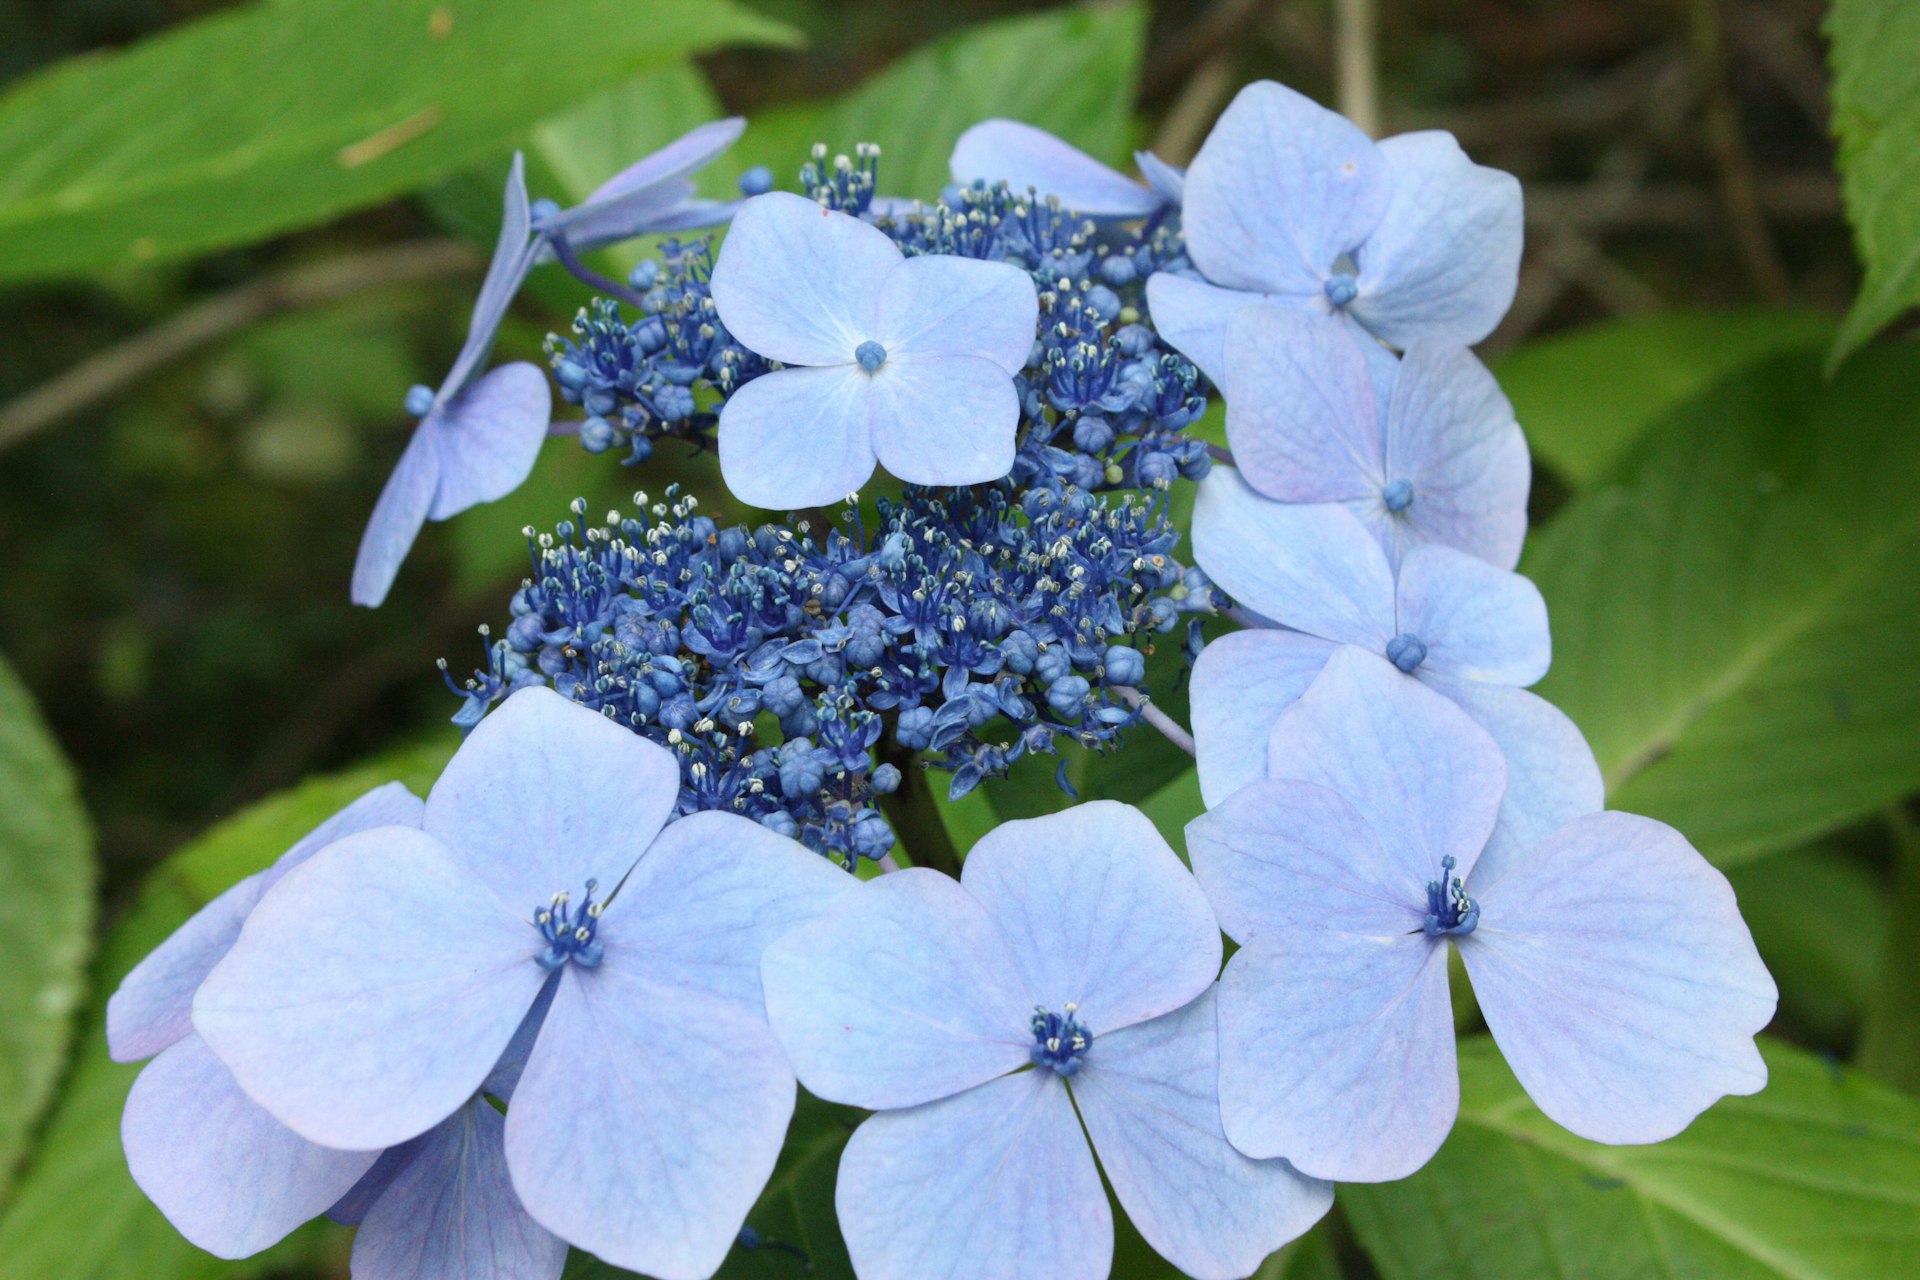 A close-up view of intricate blue hydrangea blooms. The flowers consist of tiny, fertile petals in the center with large, sterile petals surrounding them. The petals have a soft blue hue, with subtle variations in color intensity, nestled among lush green leaves in their natural garden habitat